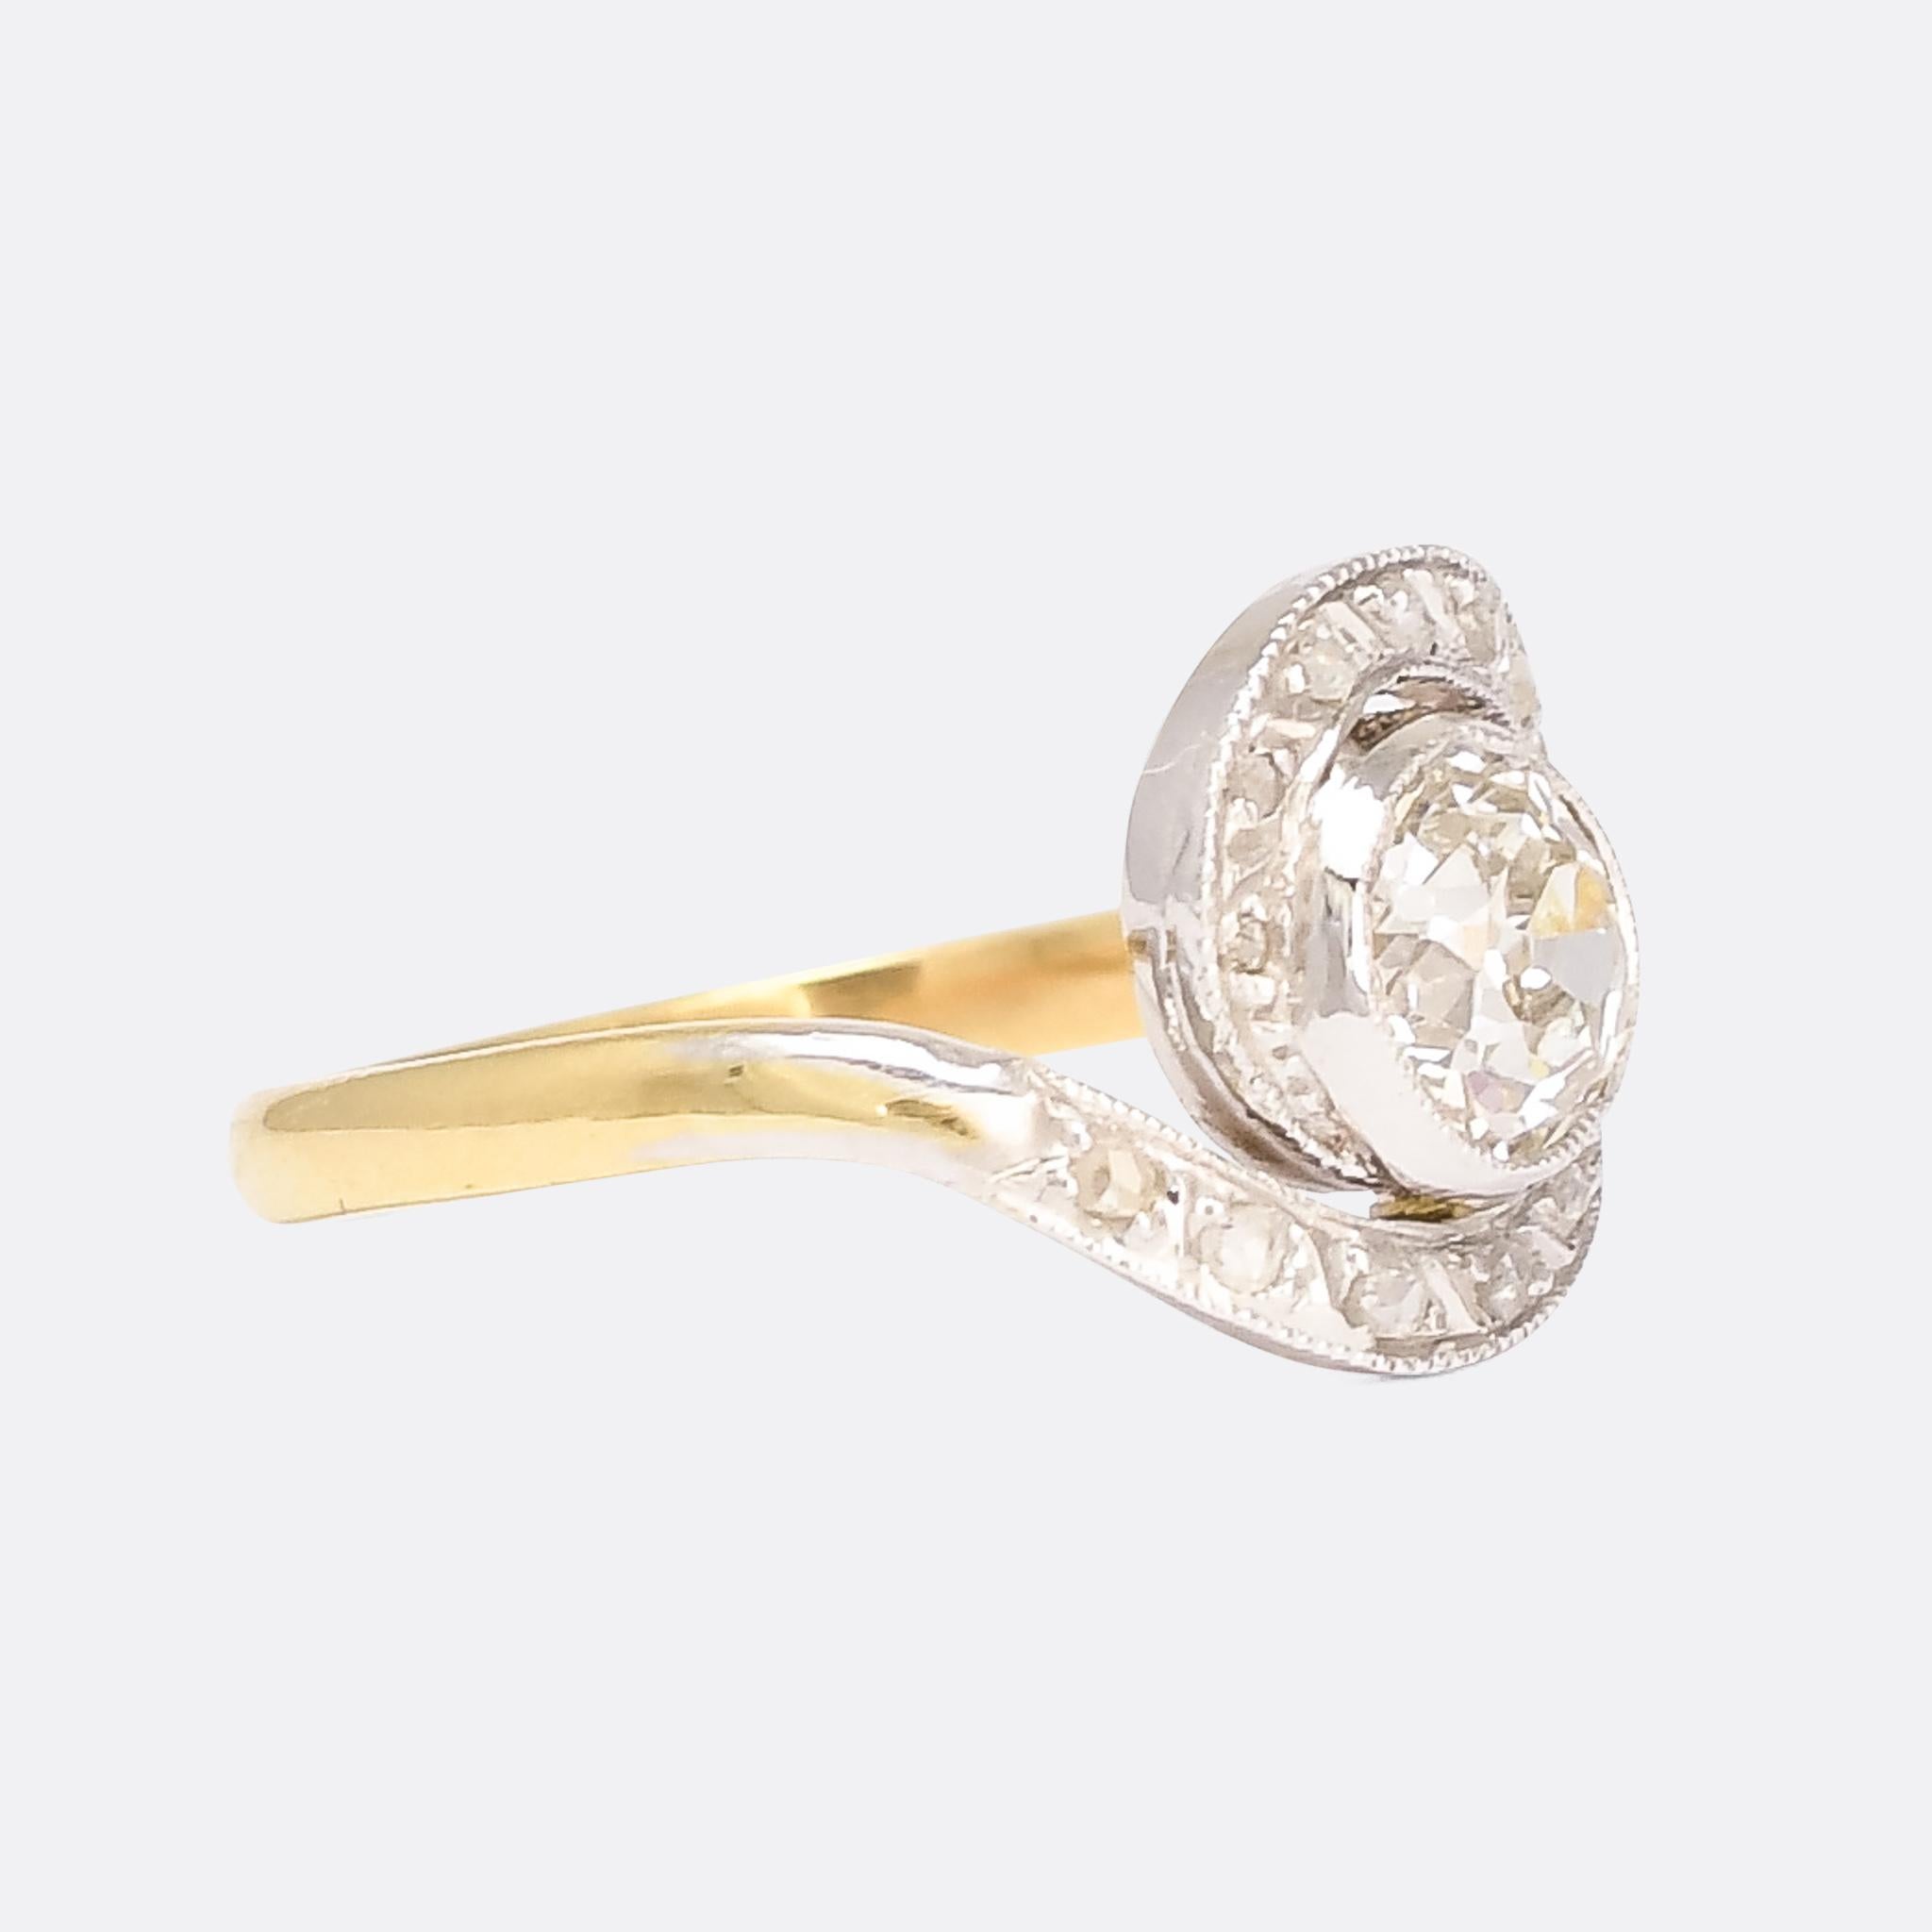 An enchanting antique diamond solitaire ring dating from the Edwardian era, circa 1910. The central stone rests within a swirl of millegrain platinum and rose diamonds, beautifully proportioned and expertly crafted by hand. It was made in France,